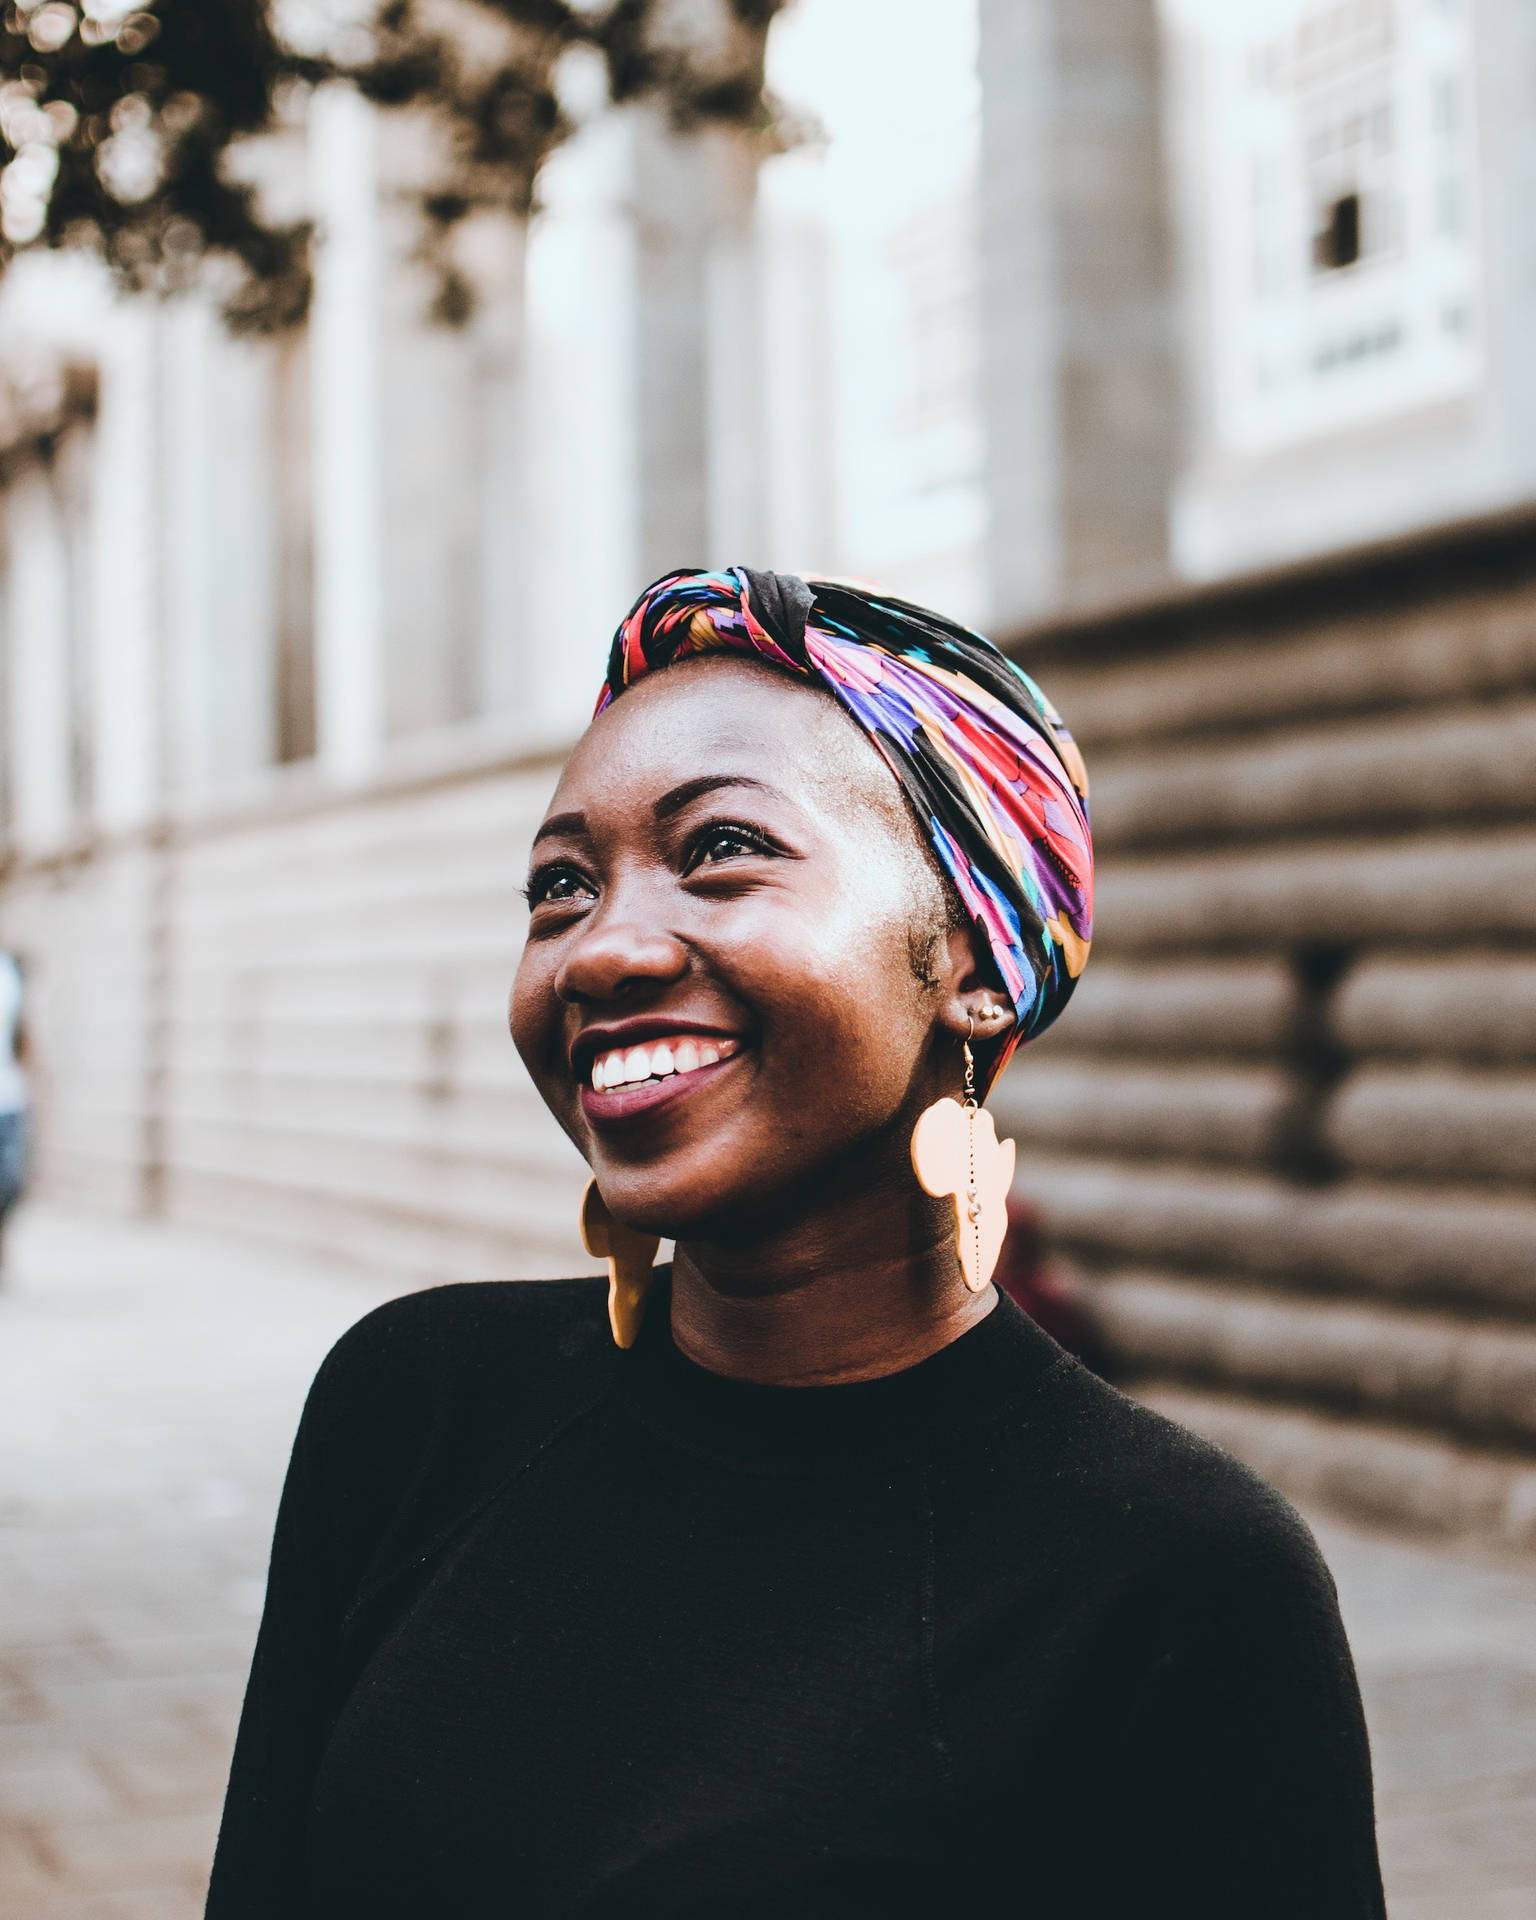 Empowered Black Woman with Vibrant Head Wrap Wallpaper